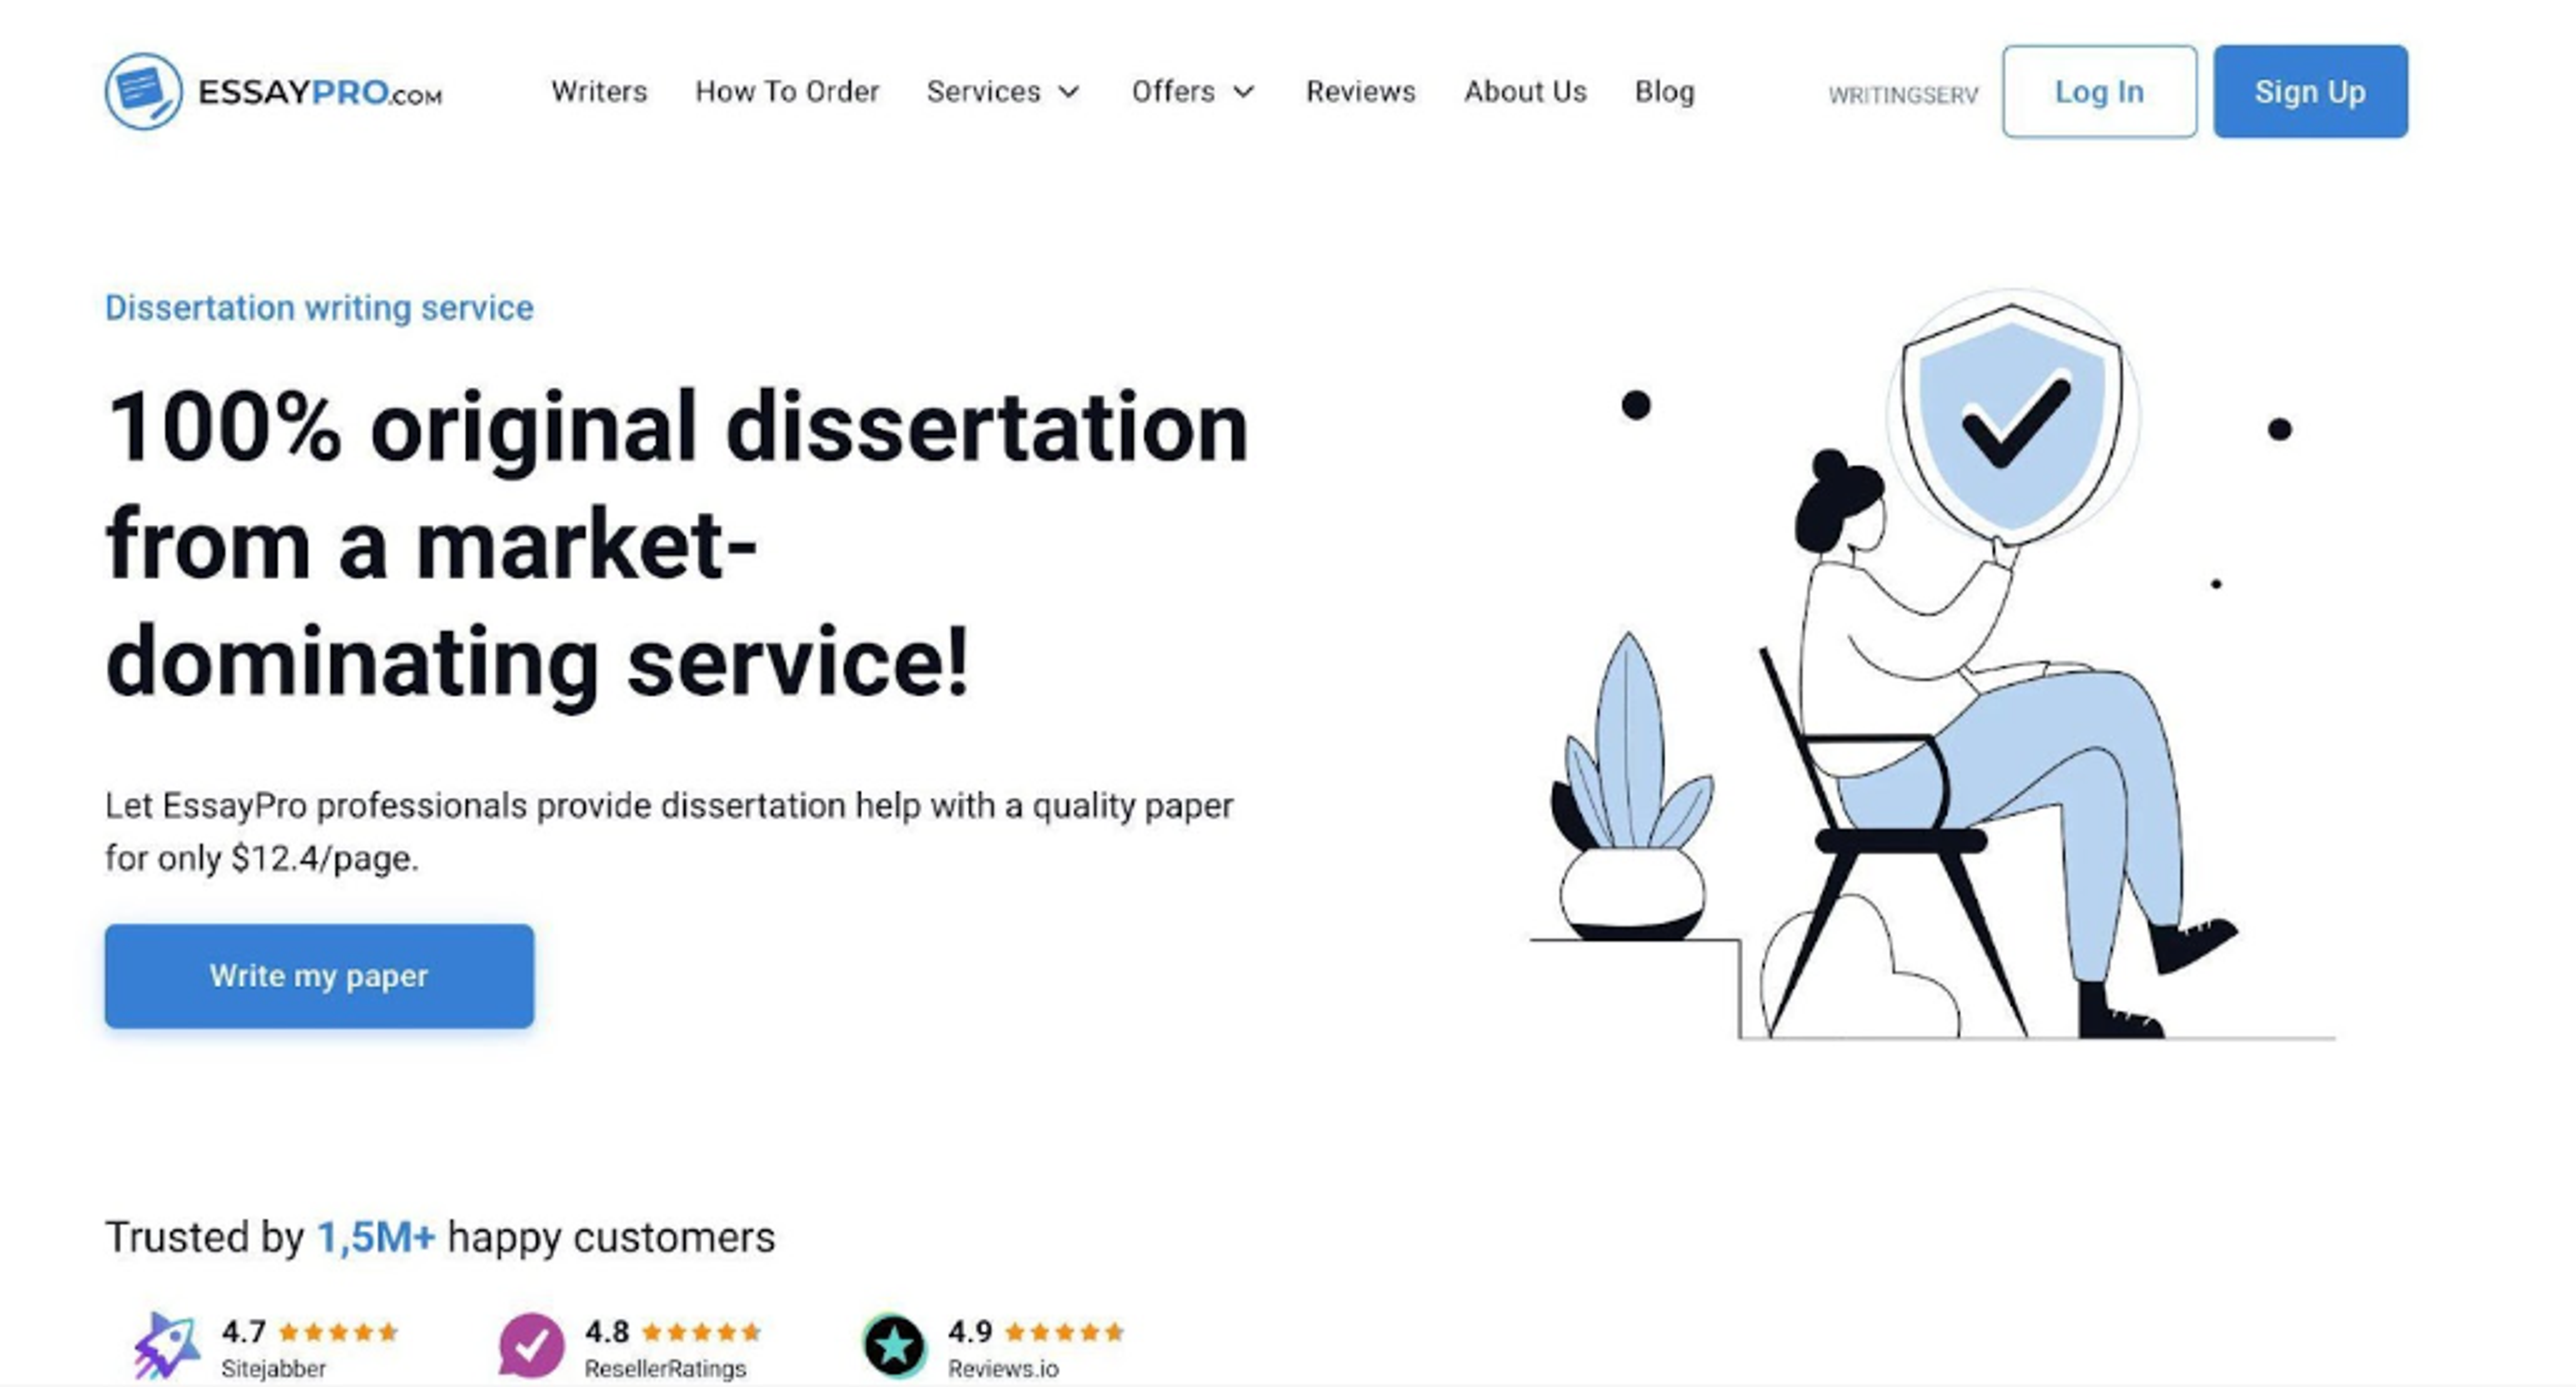 capstone and dissertation writing services reviews